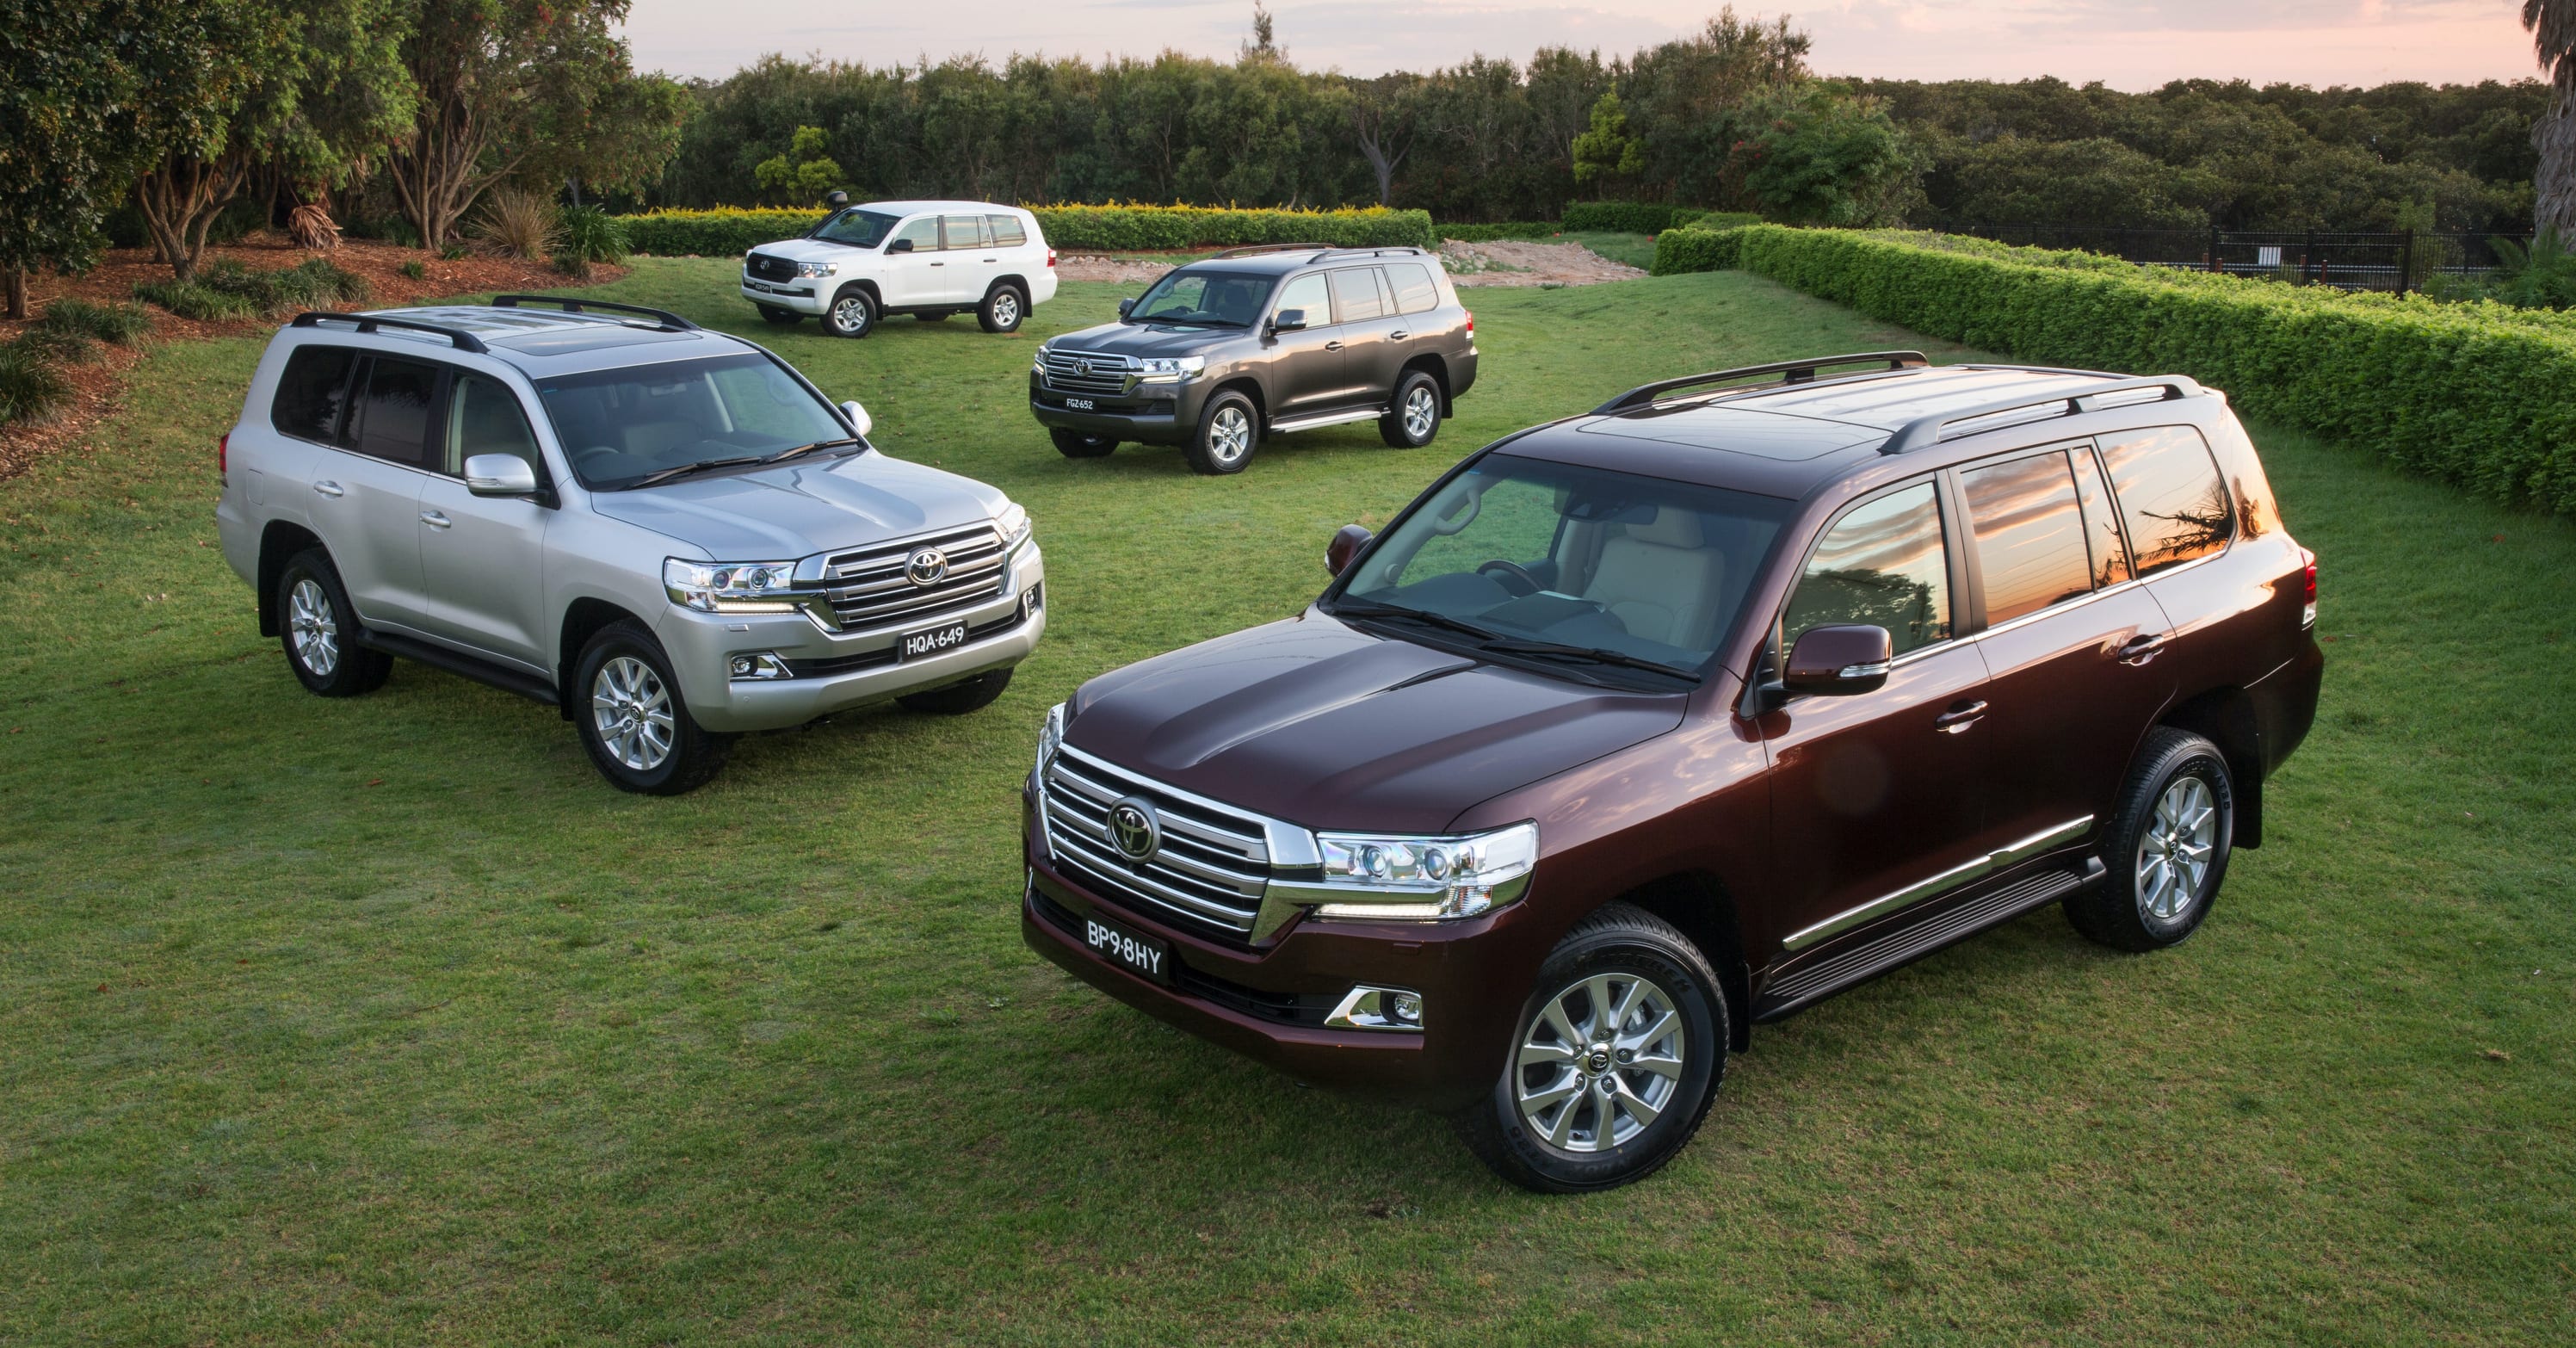 New Report Claims Toyota Landcruiser V8 Will Be Axed Mystery